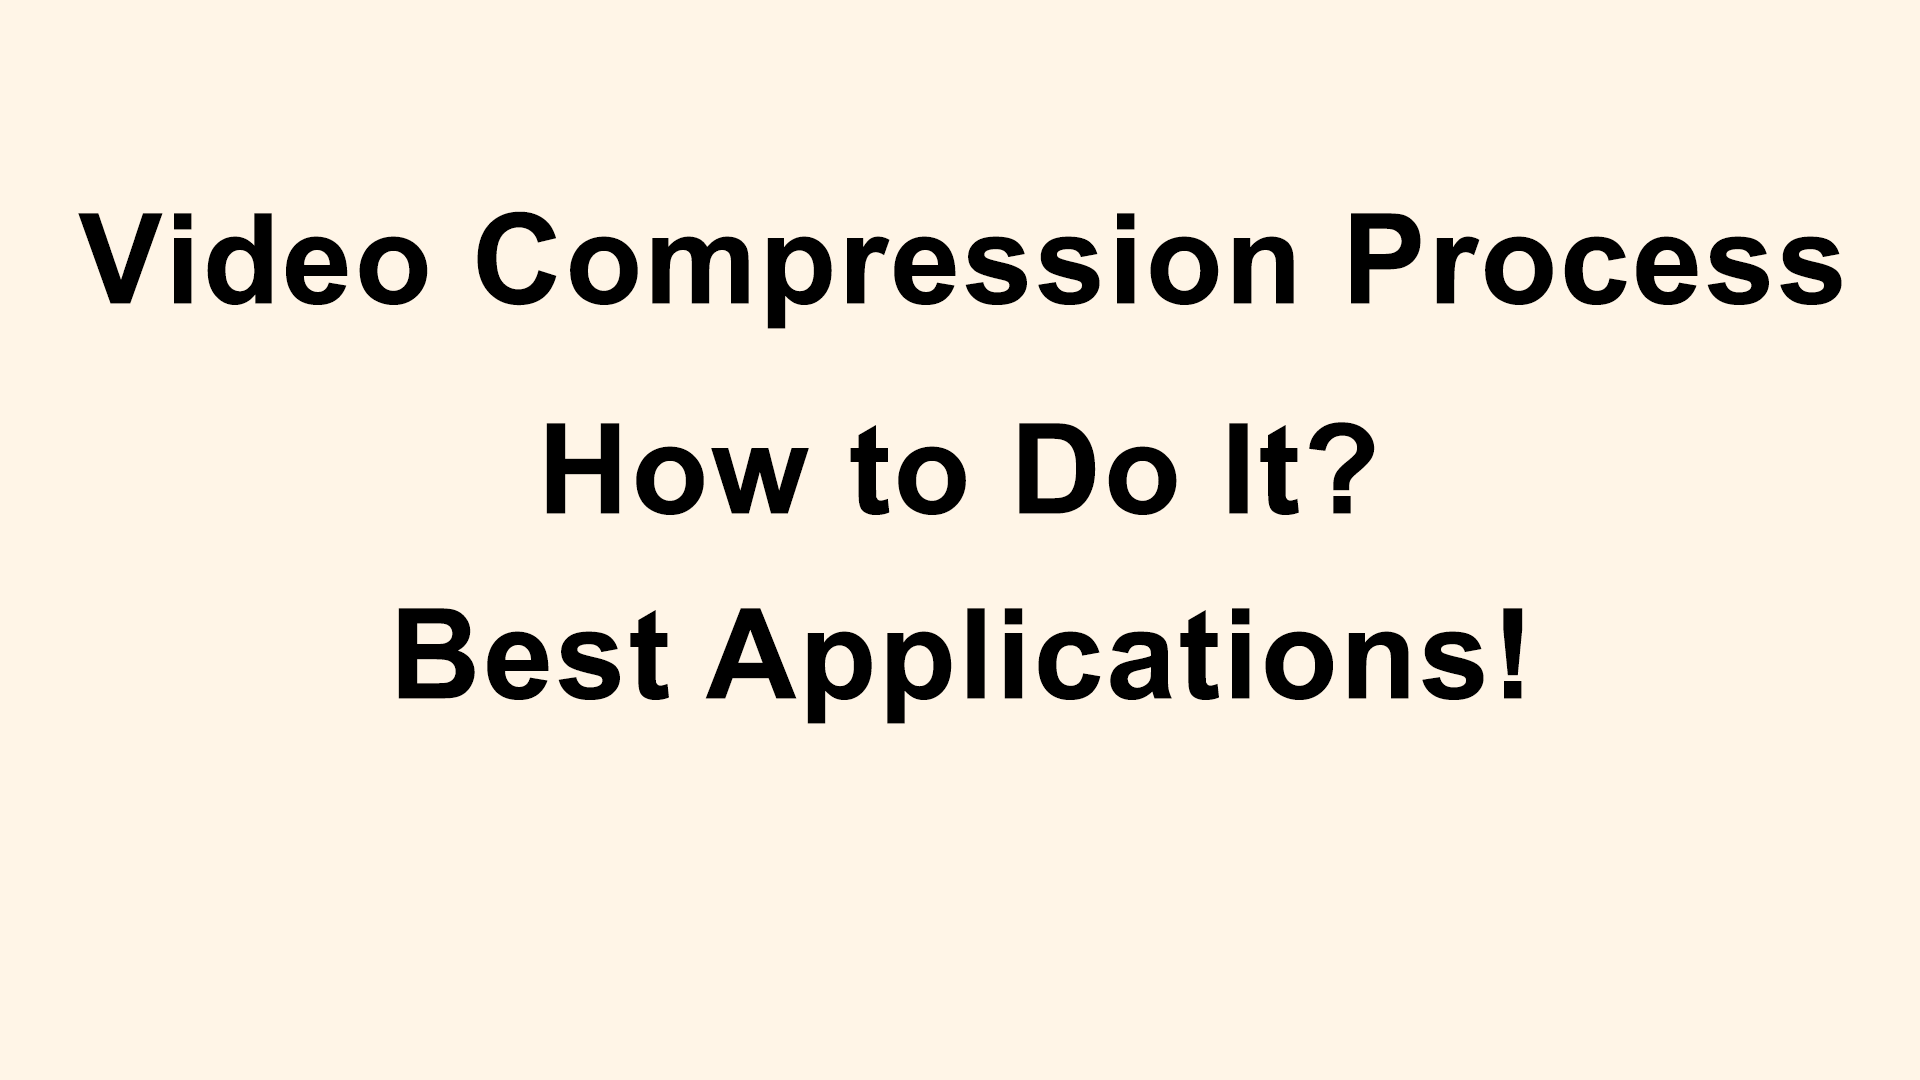 Video Compression Process How to Do It Best Applications